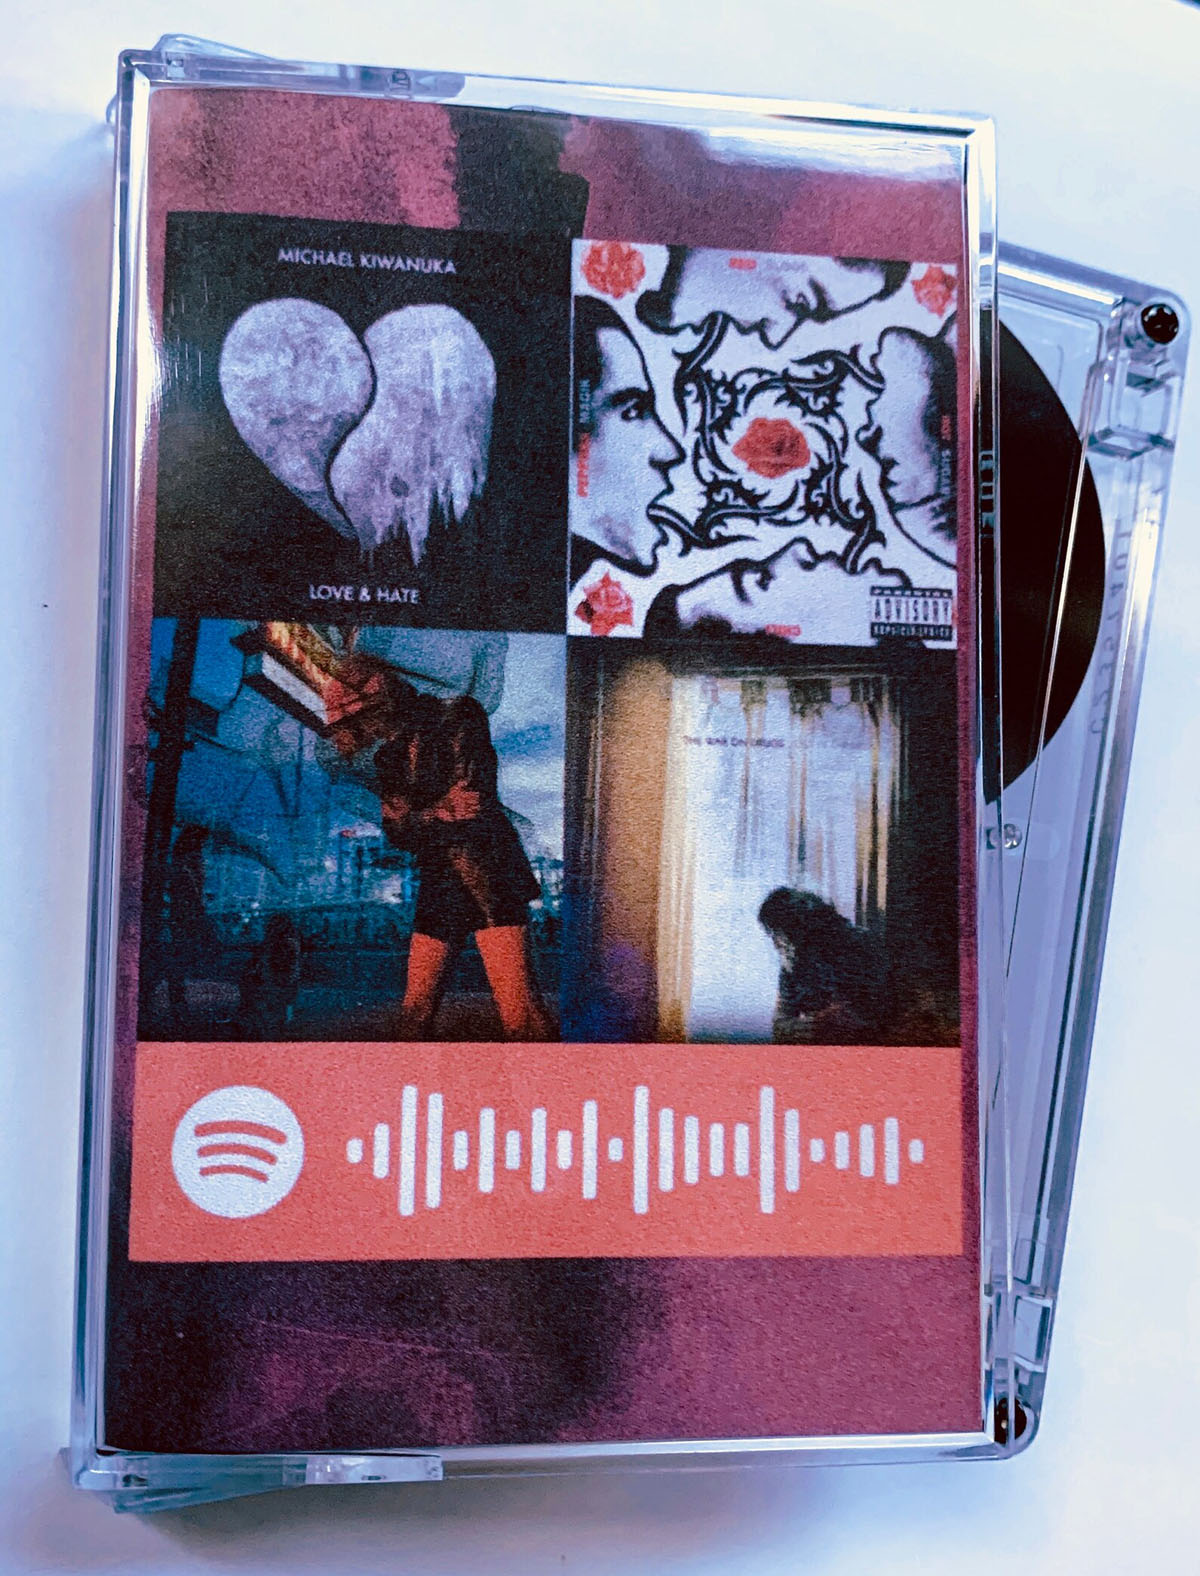 mixtape cassette, one of the most unique travel gifts